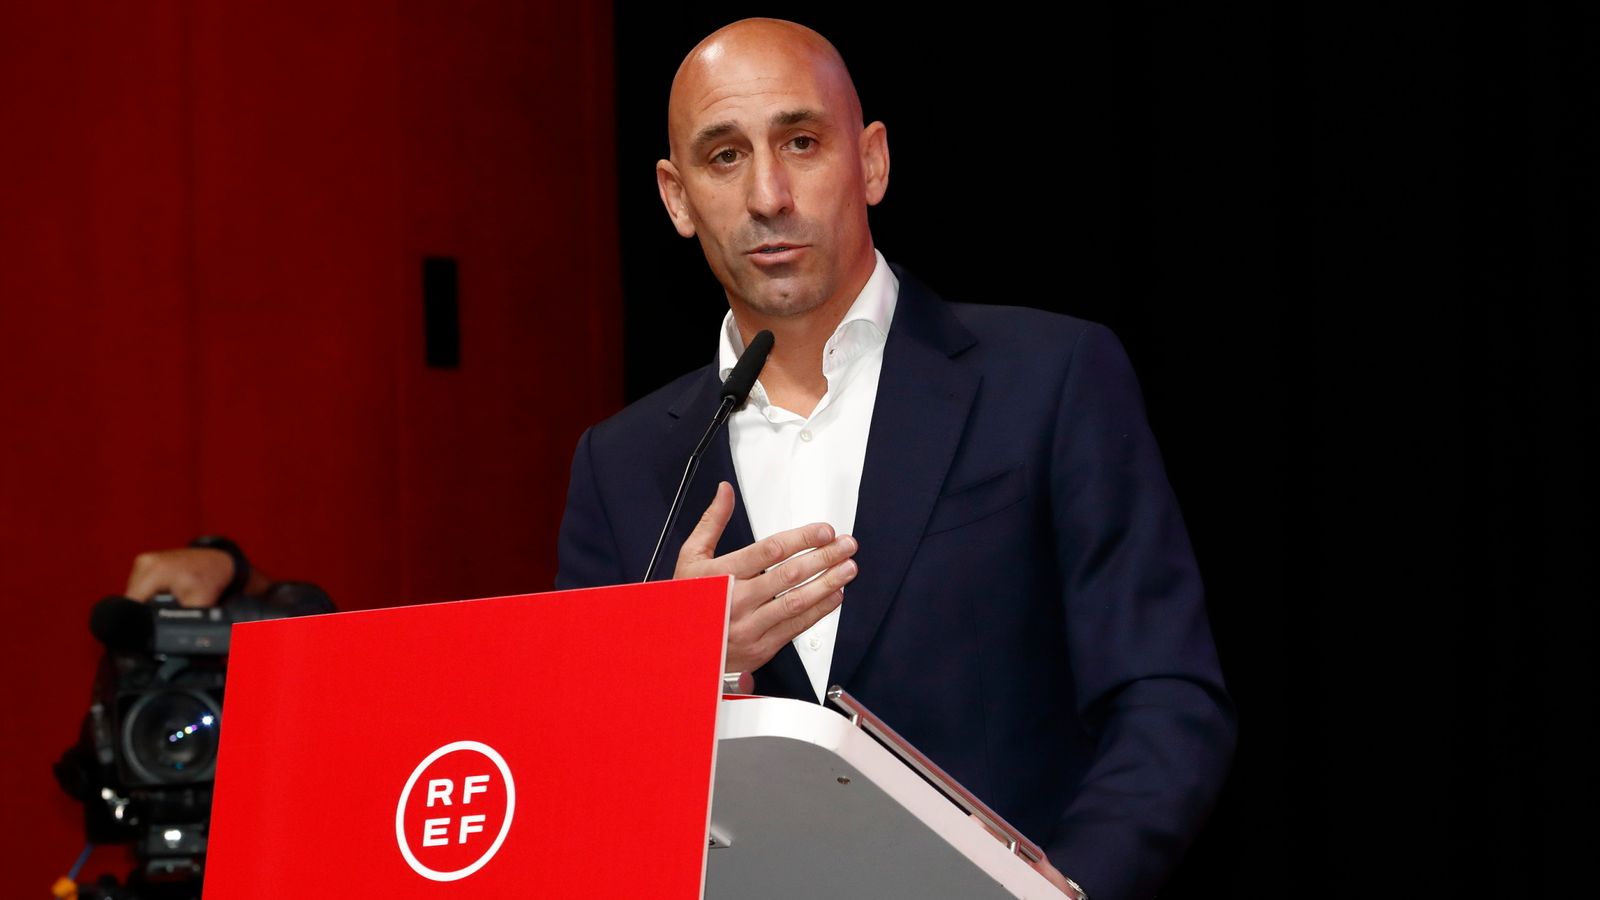 Luis Rubiales: Former Spanish Football Association president to stand trial for kissing player Jenni Hermoso